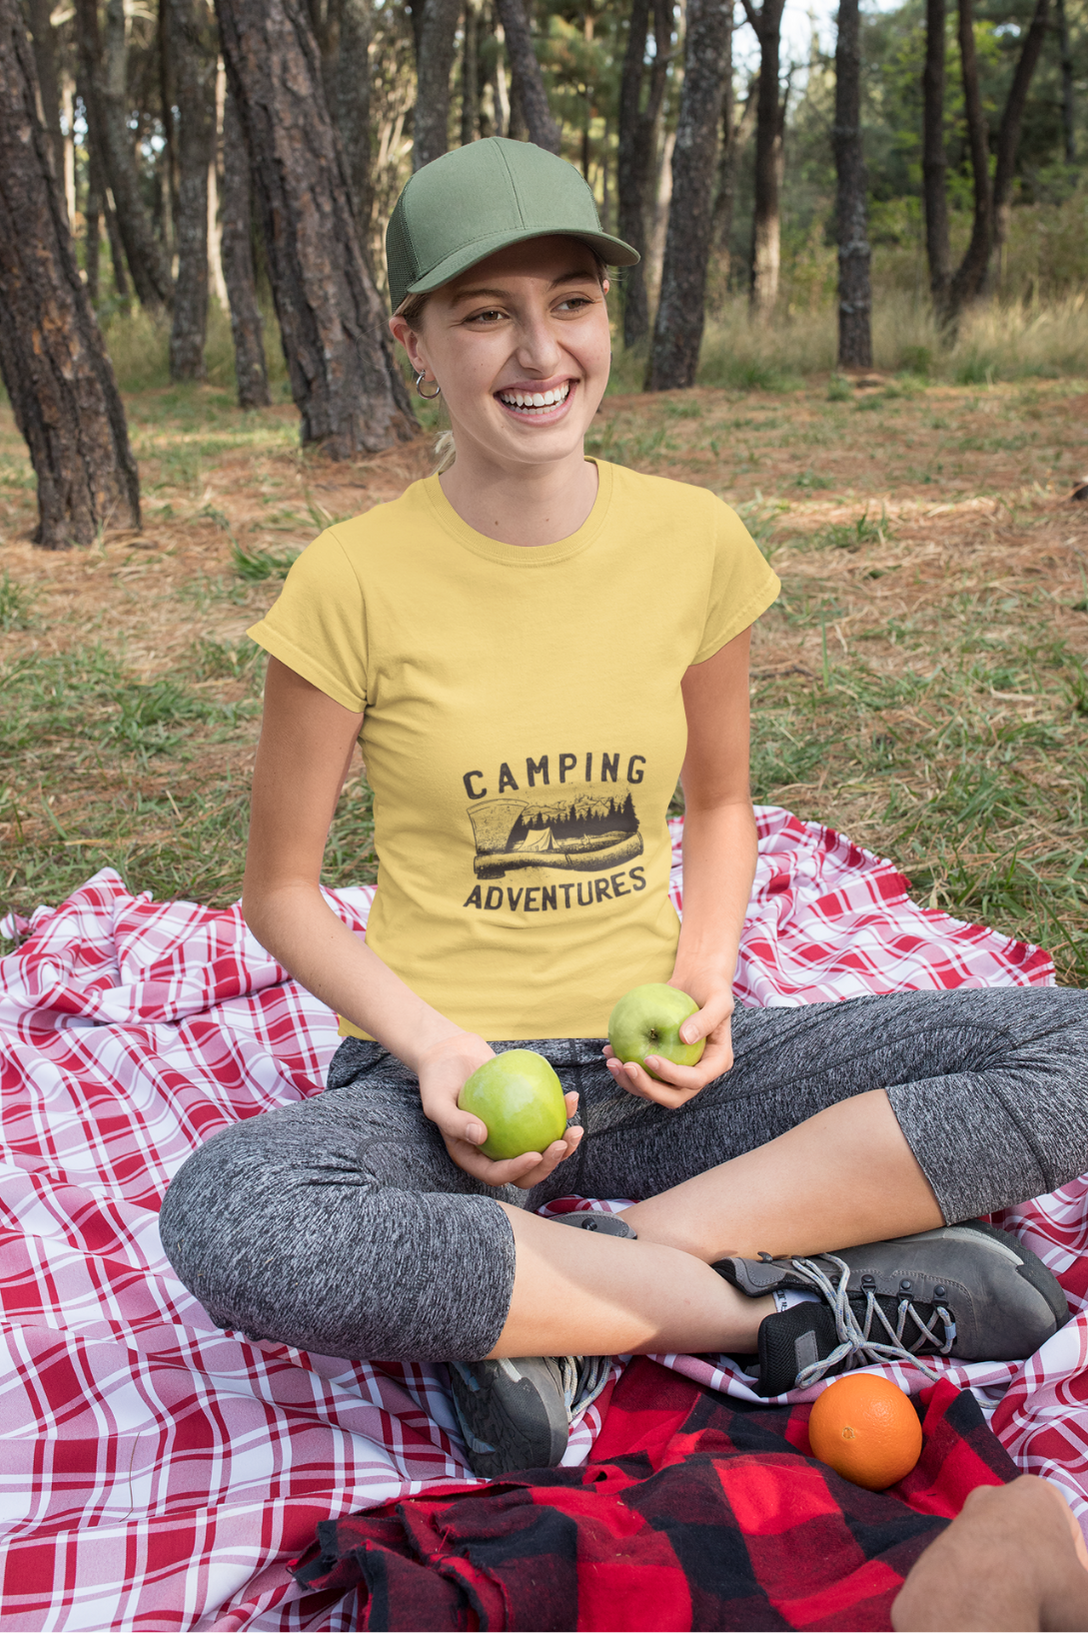 Camping Adventures Printed T-Shirt For Women - WowWaves - 2